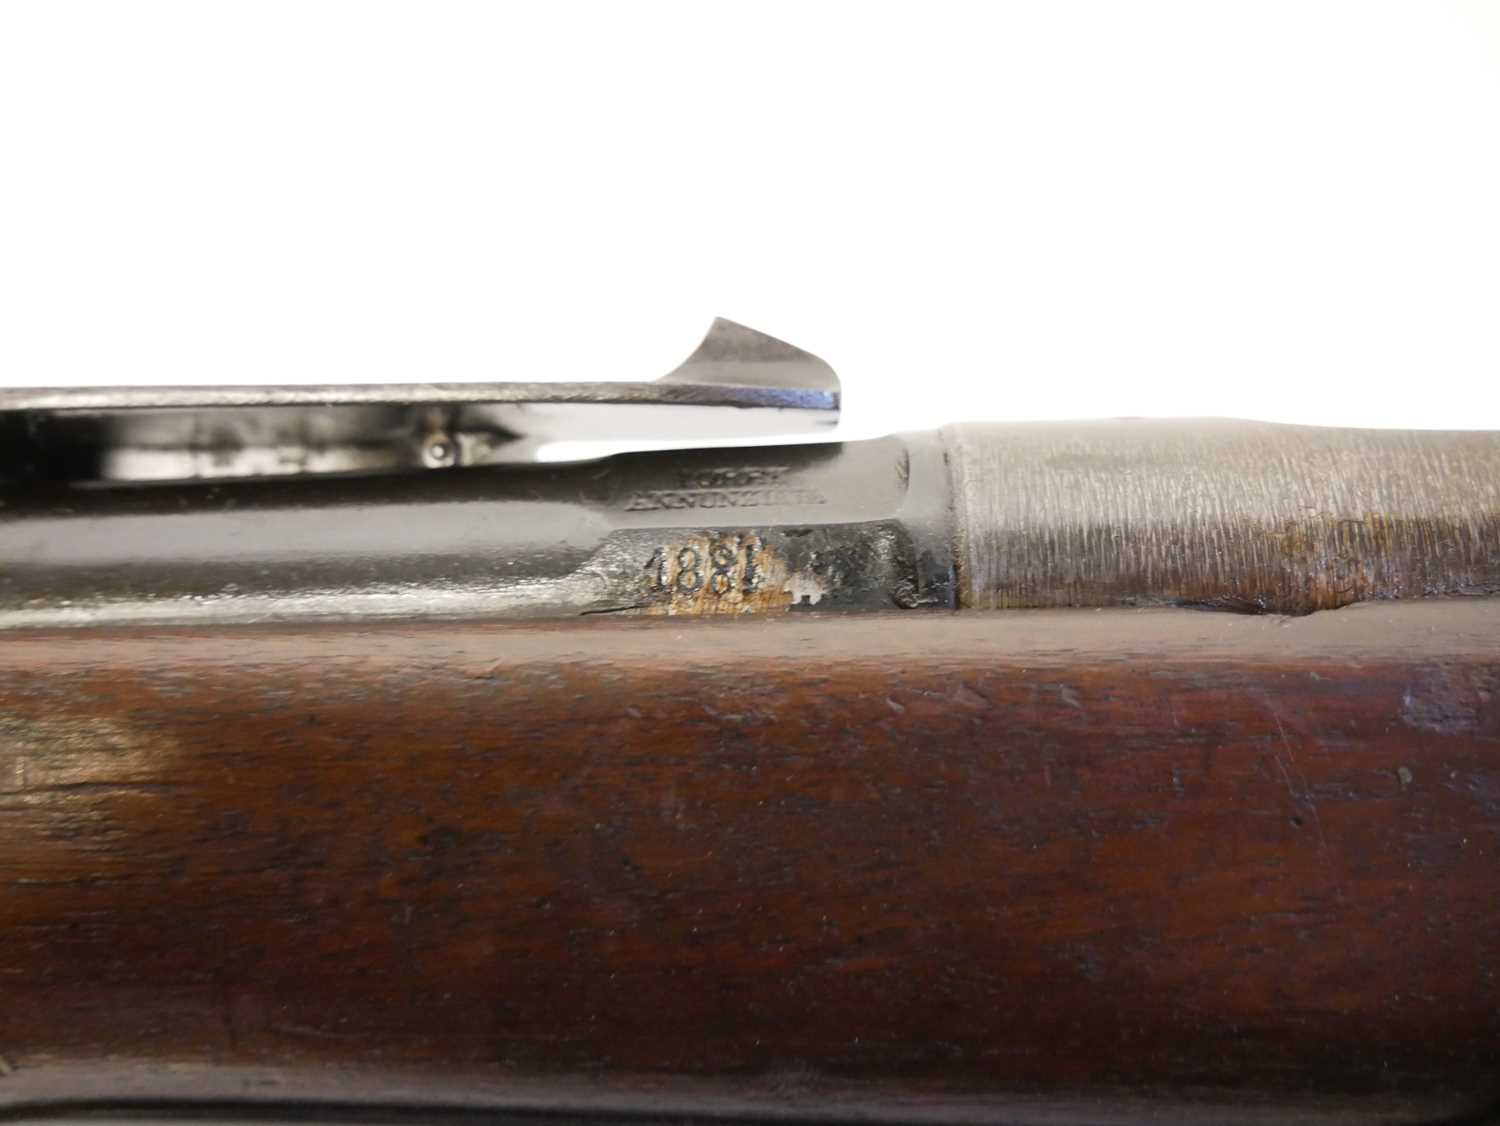 Italian Vetterli M.1870/87 10.35x47R bolt action rifle, serial number 5778, 33.5inch barrel fitted - Image 14 of 17